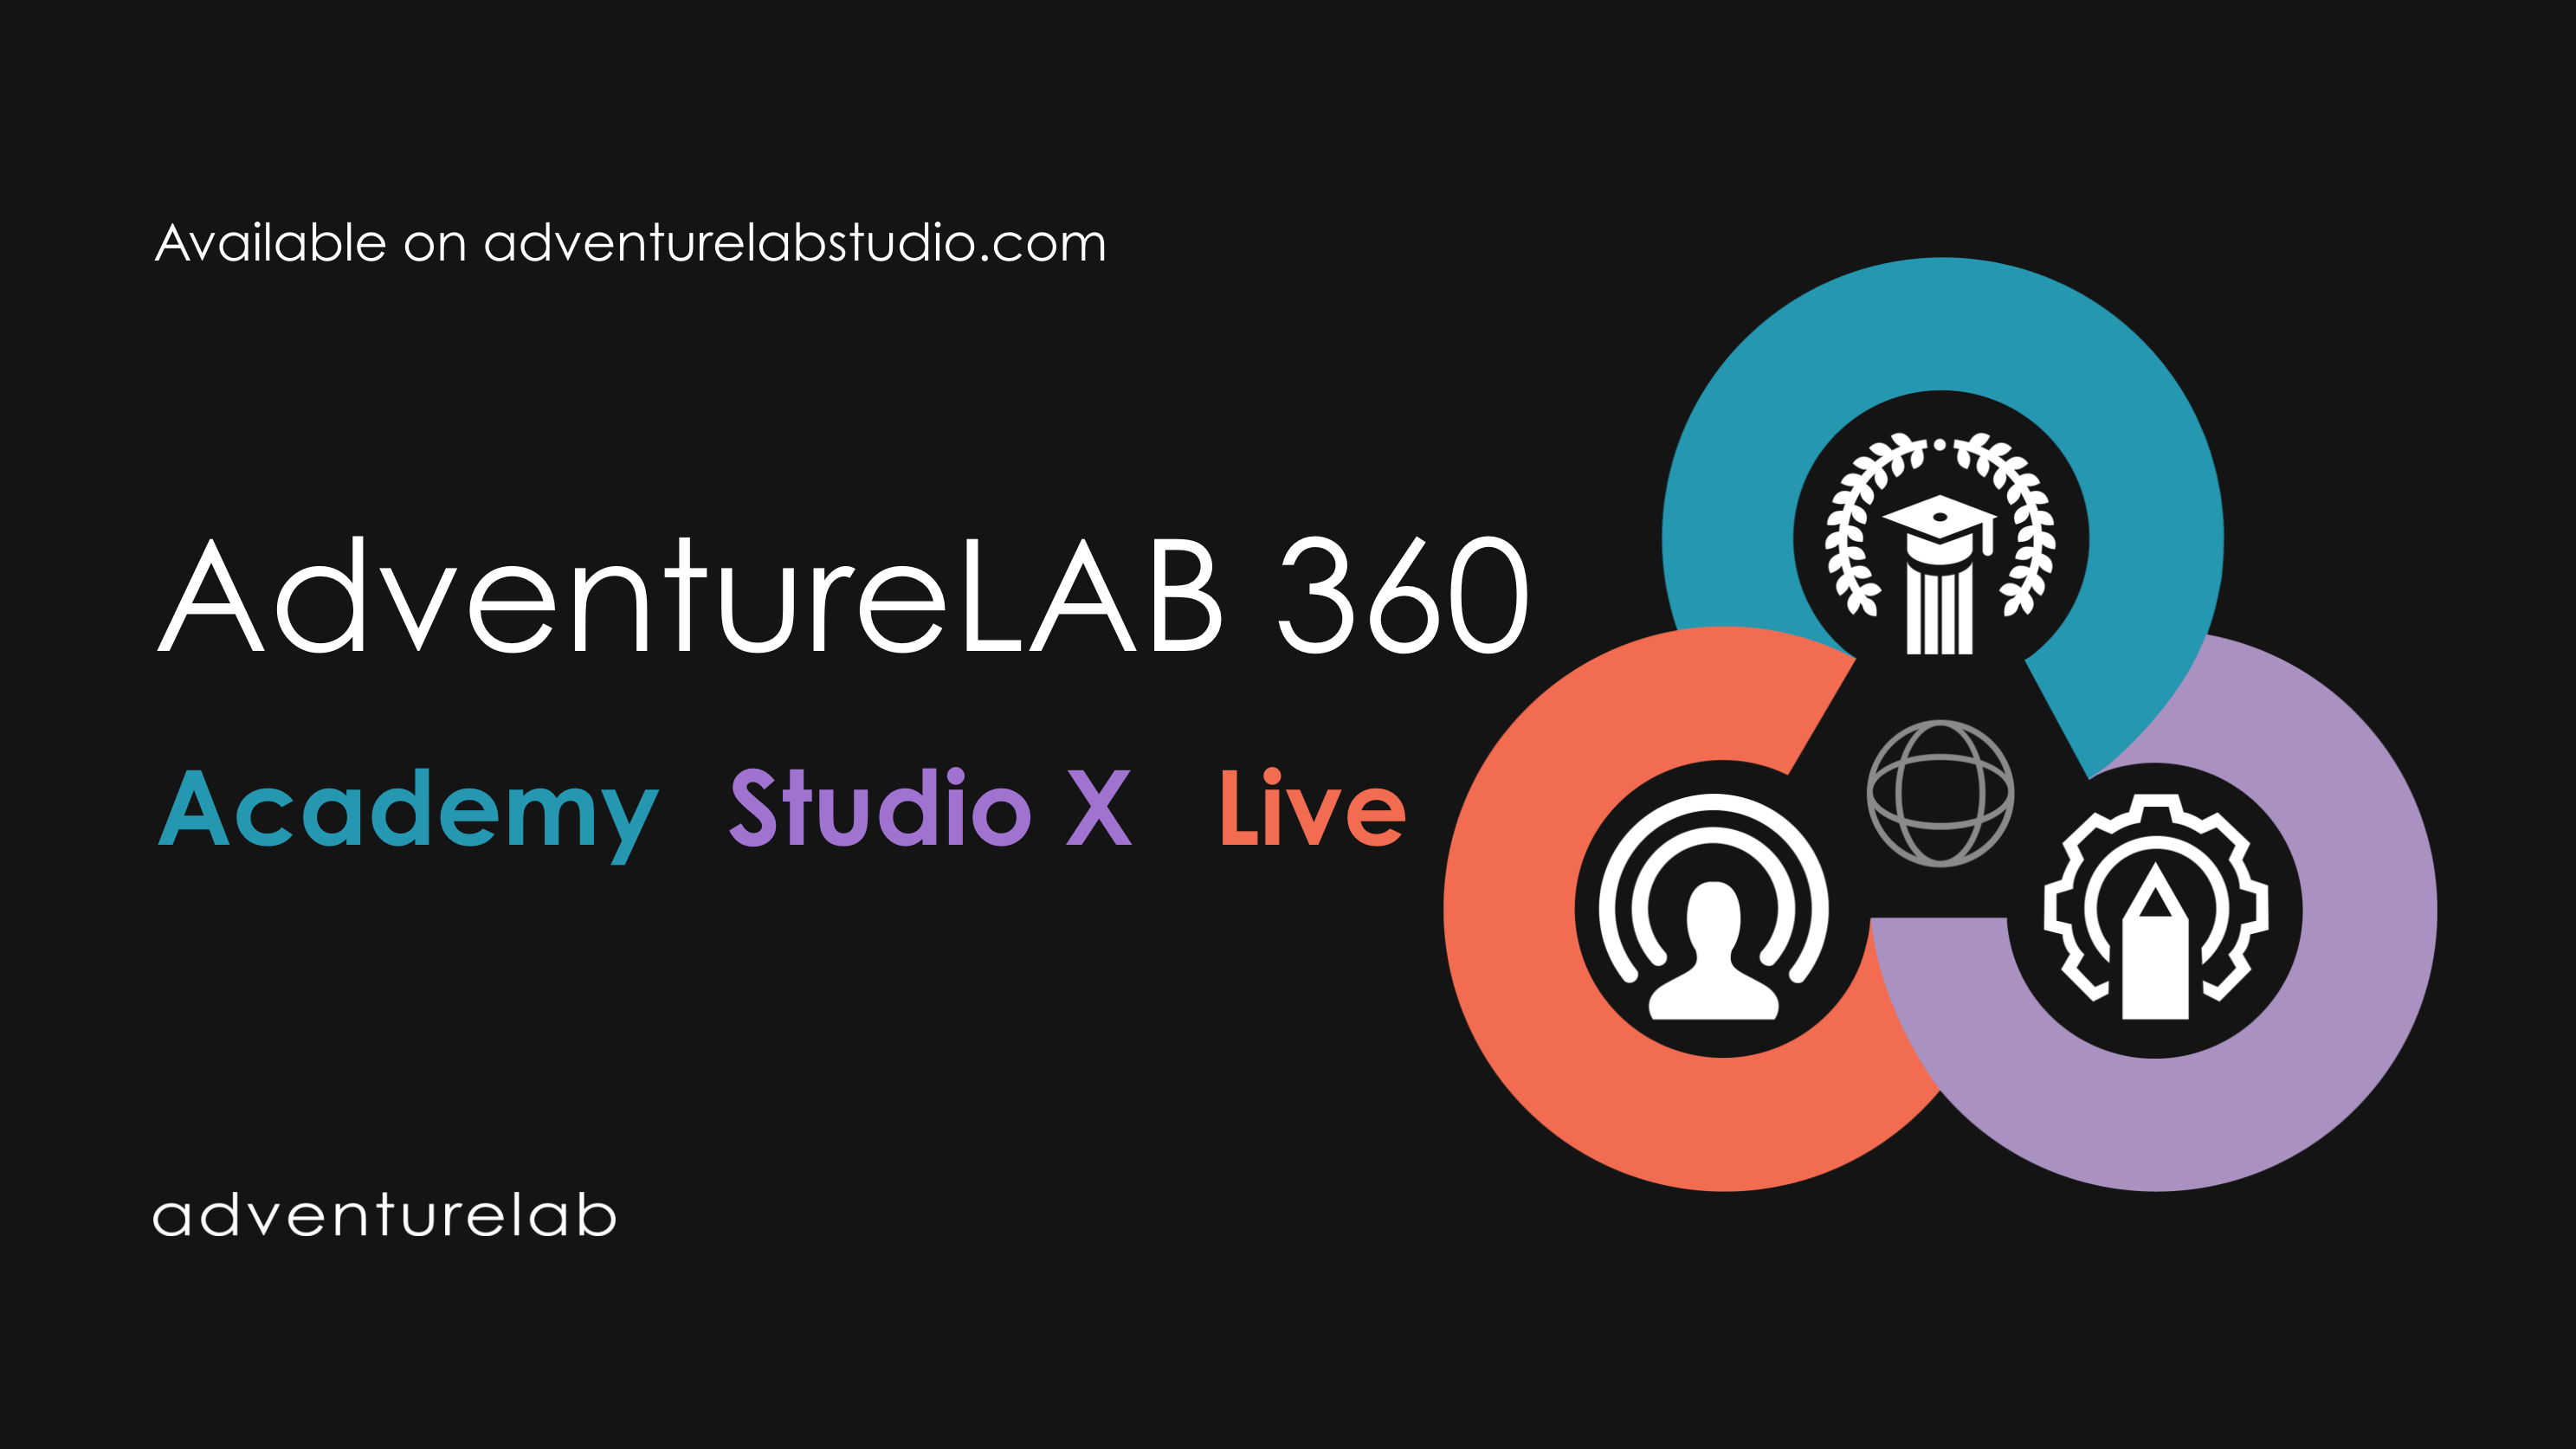 Launching AdventureLAB 360 – the upgraded system of services